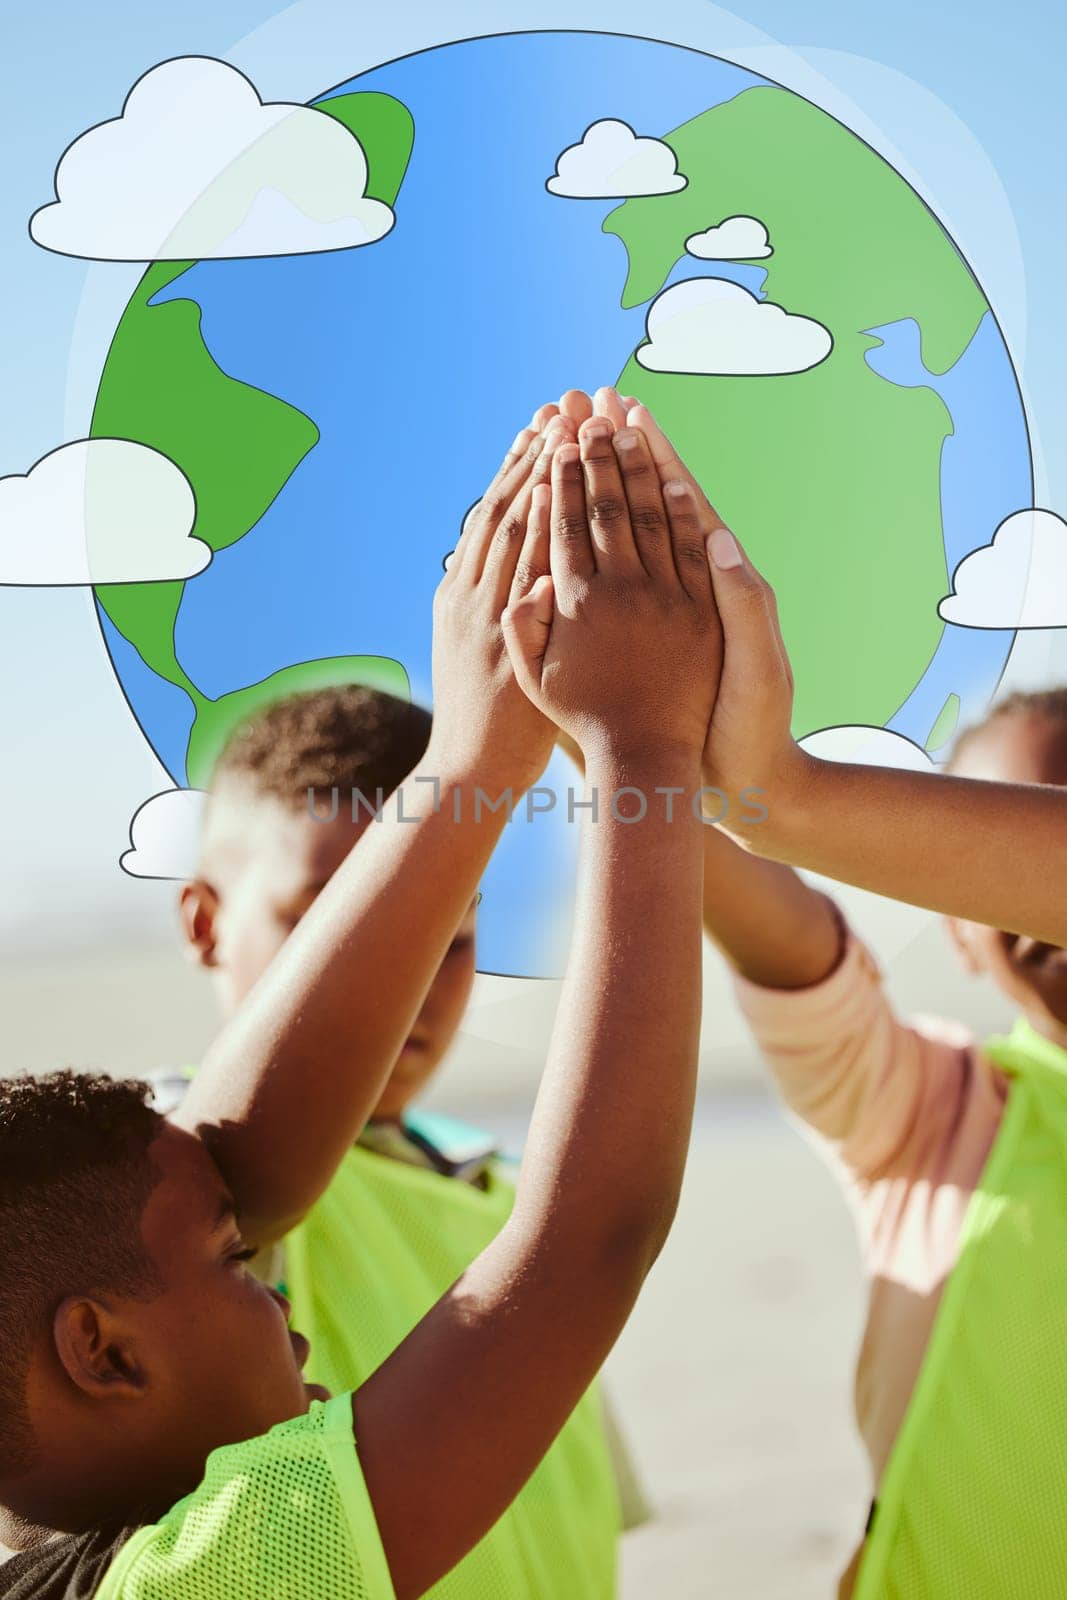 Earth, hands and high five by volunteer children collaboration to support teamwork, help and community. Hand, friends and kids connect in change, world and partnership for environment, planet or goal by YuriArcurs